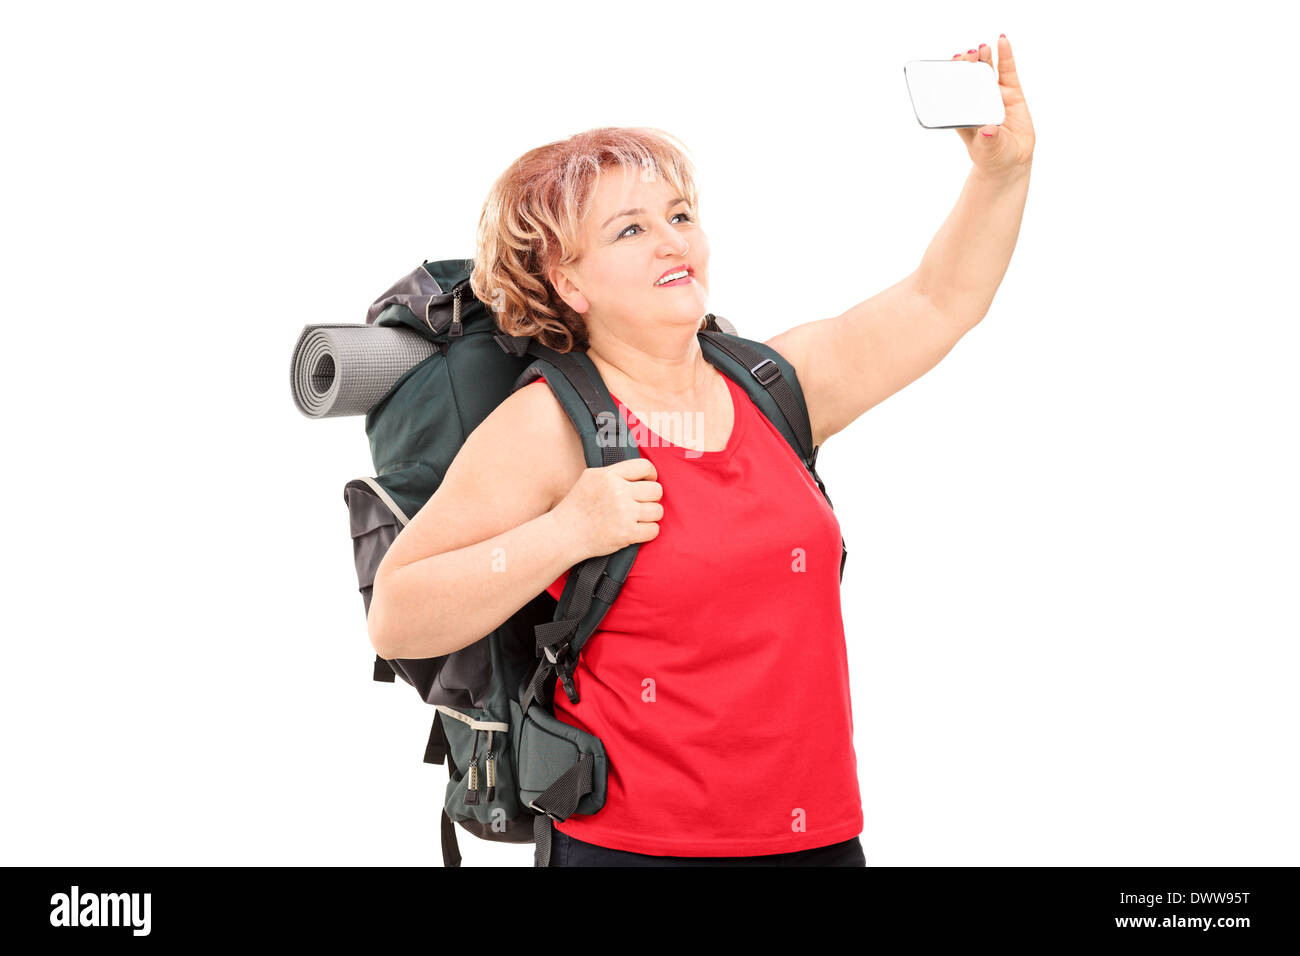 Woman with hiking equipment taking a selfie Stock Photo